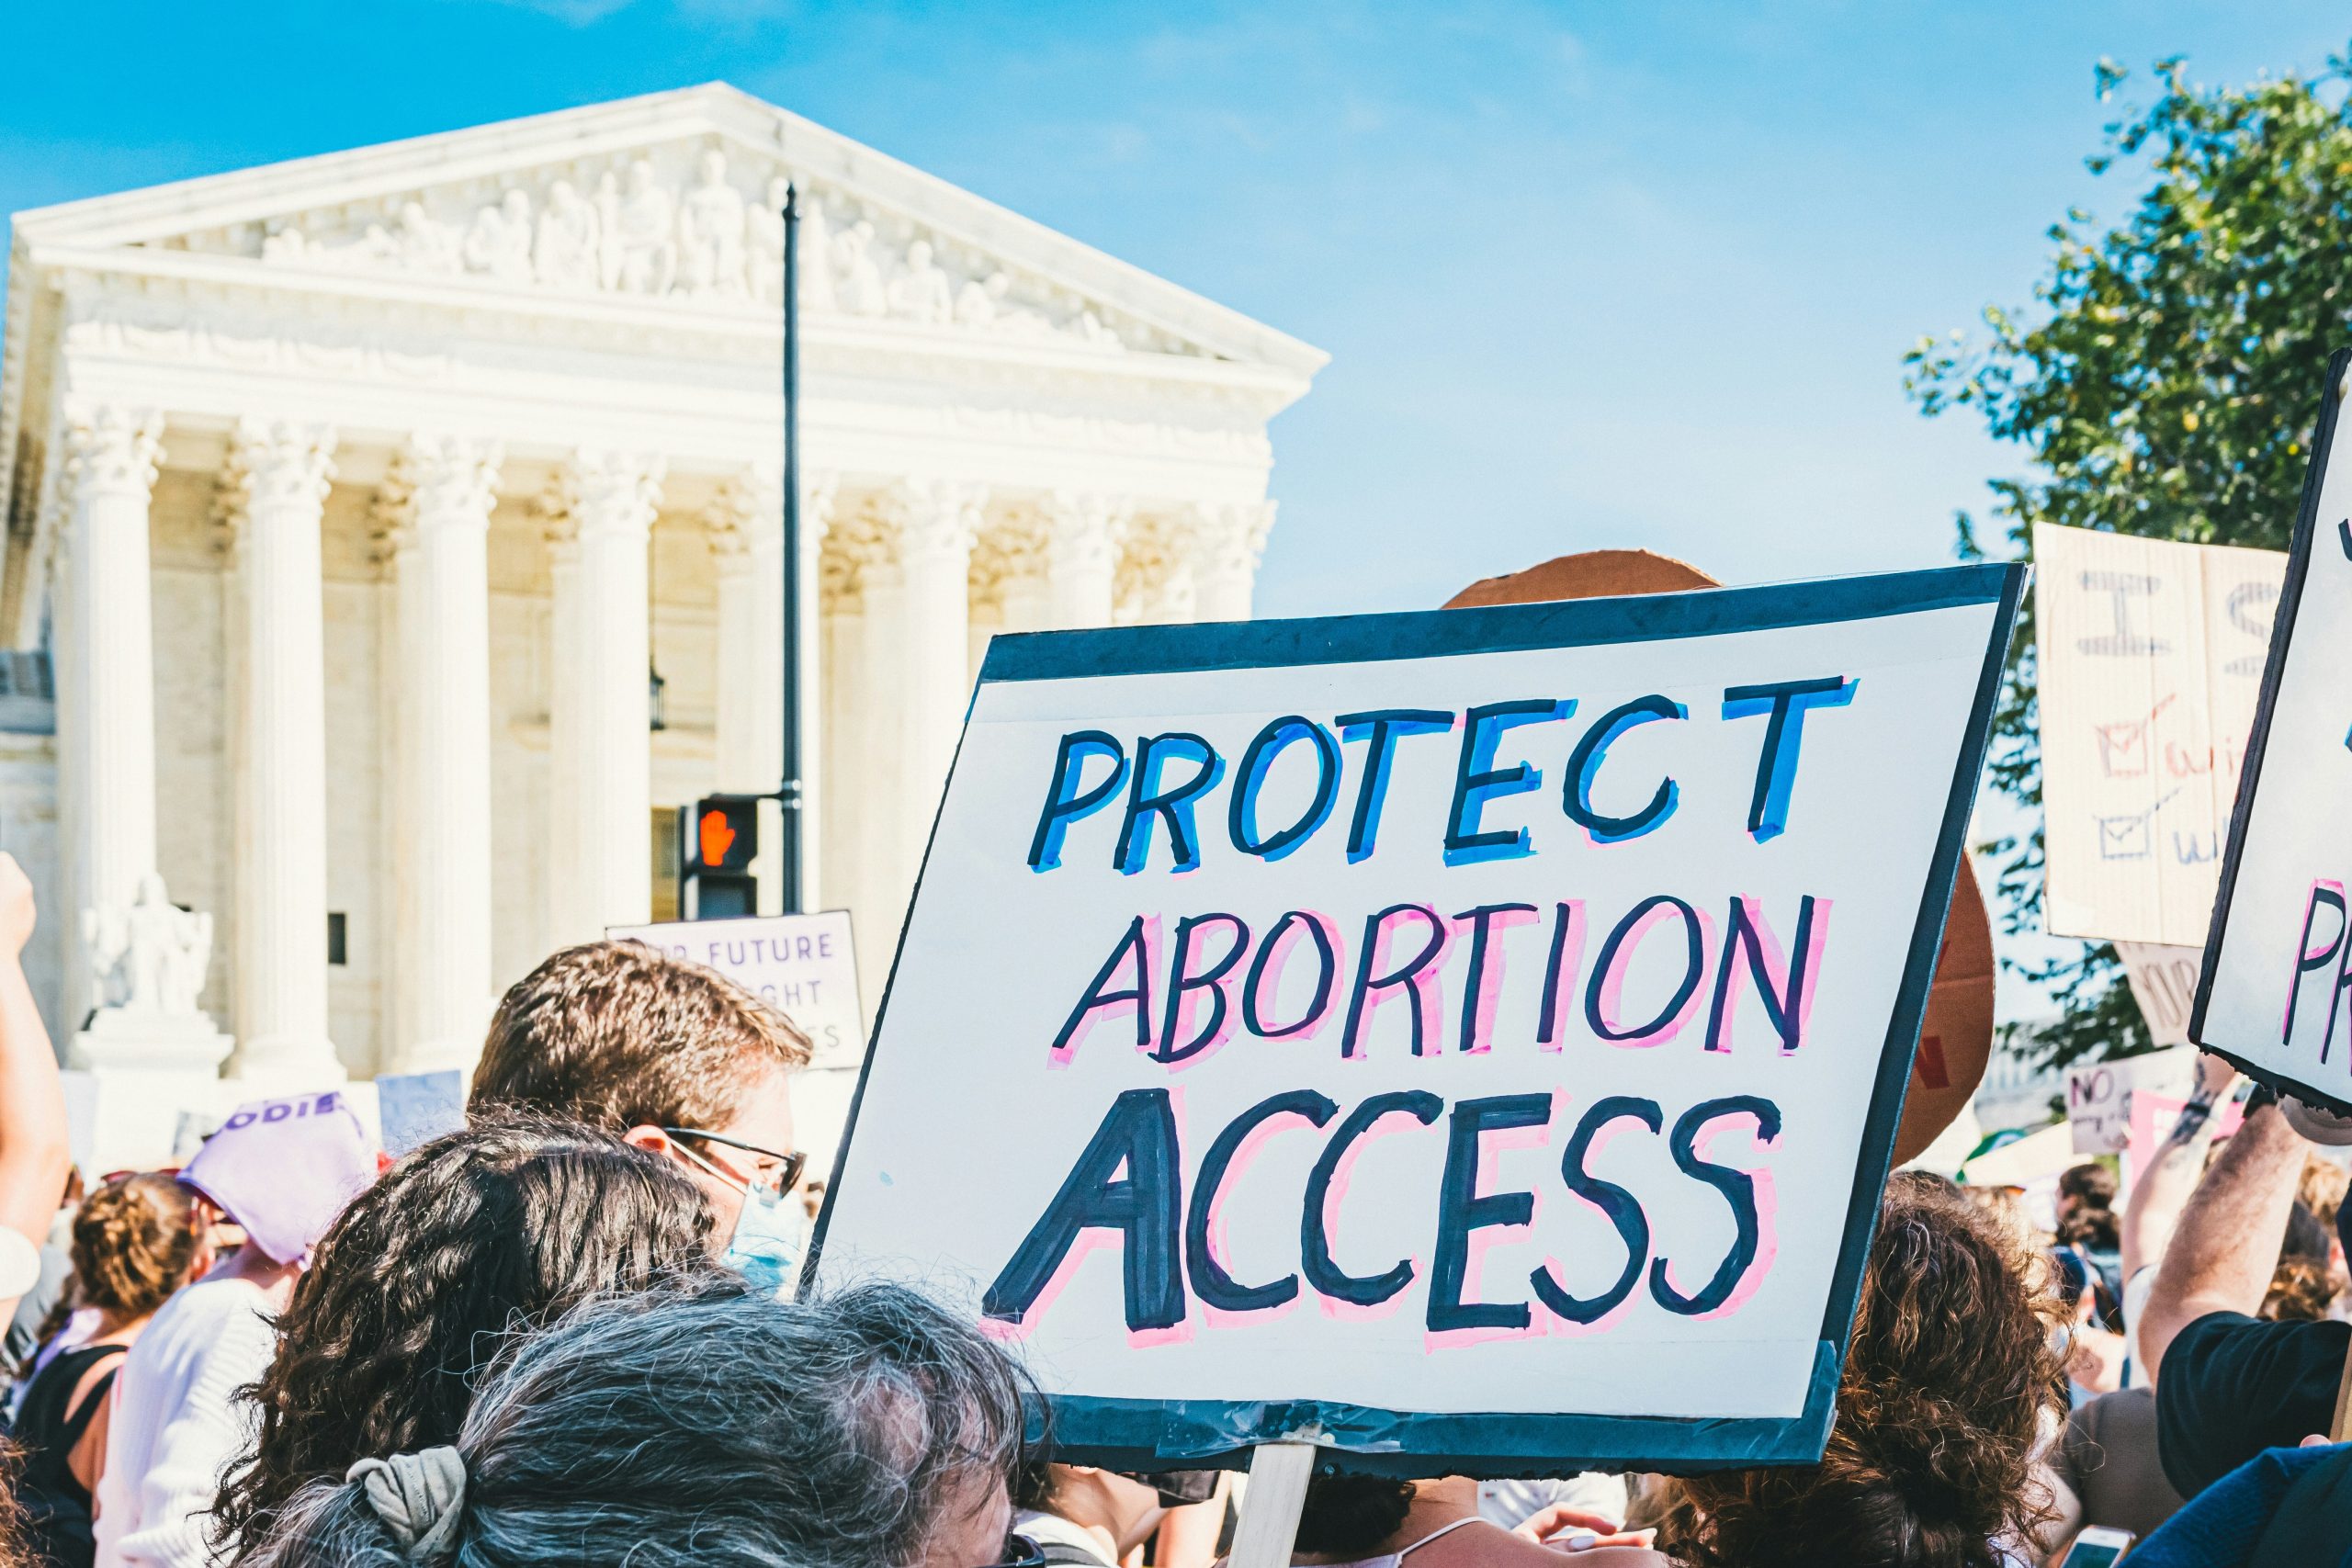 A crowd at a protest with someone holding a sign that says "Protect Abortion Access"